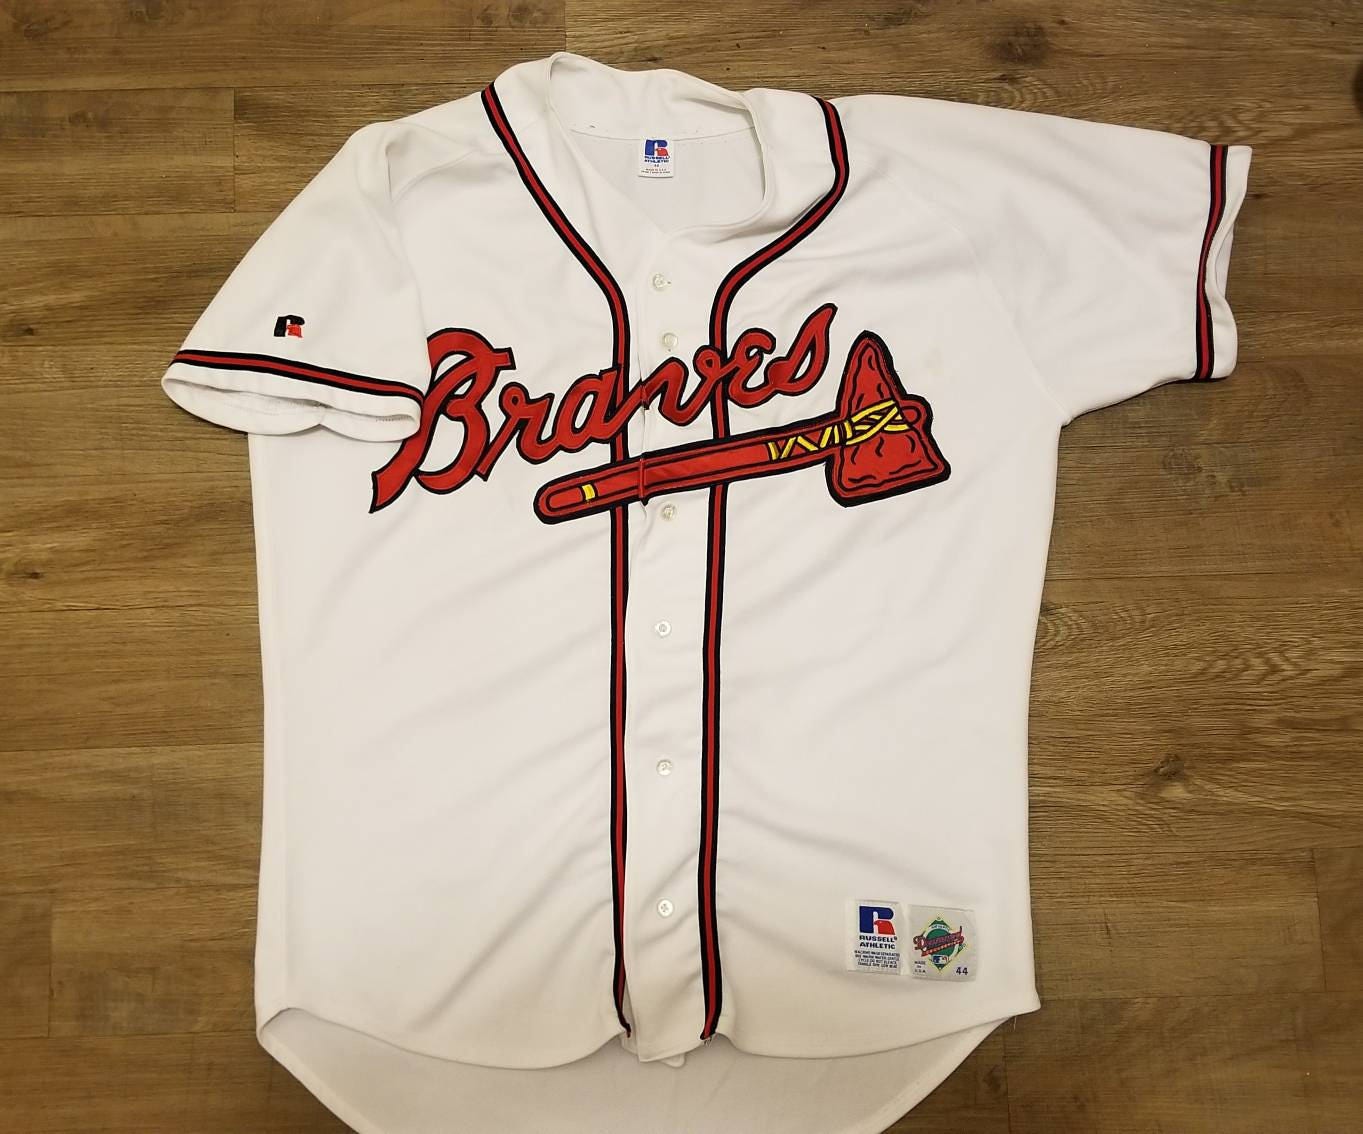  Braves Deion Sanders Authentic Signed White Majestic